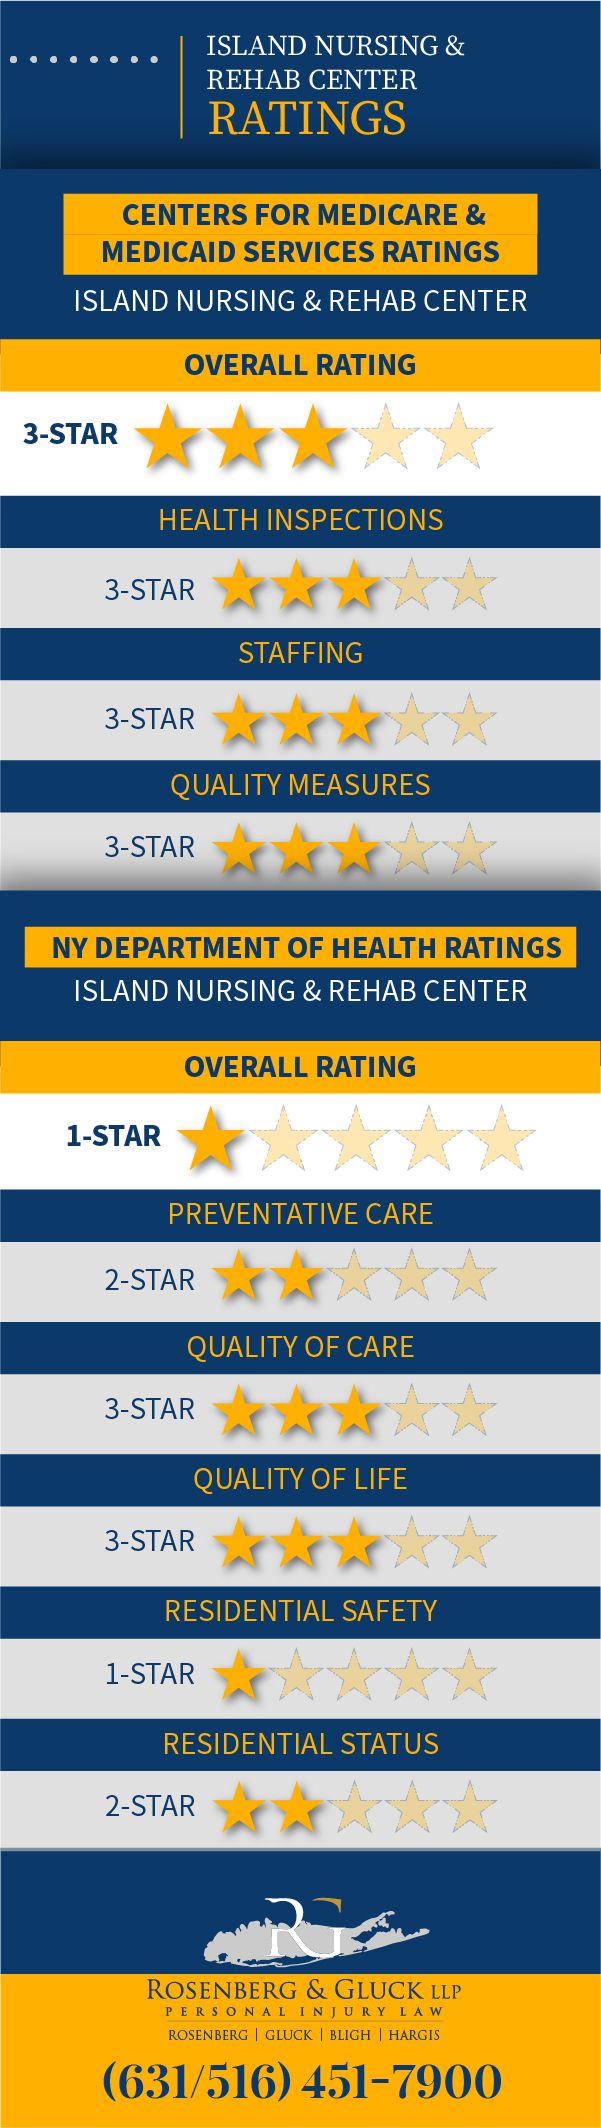 Island Nursing and Rehab Center Violations and Ratings